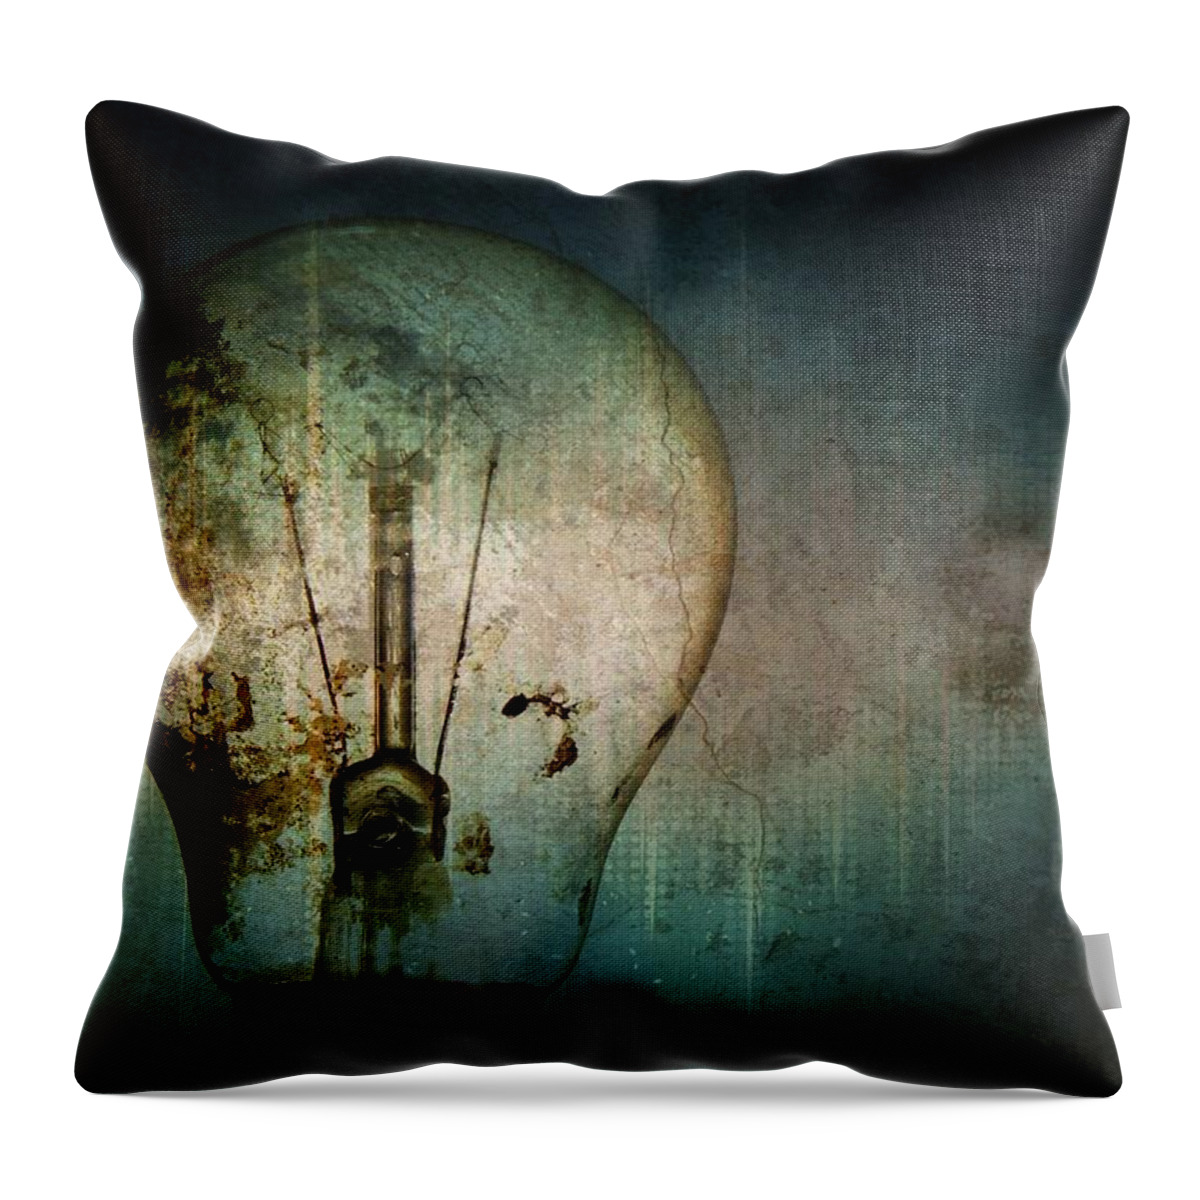 Bright Light Throw Pillow featuring the photograph Concept Illumination by Pamela Patch